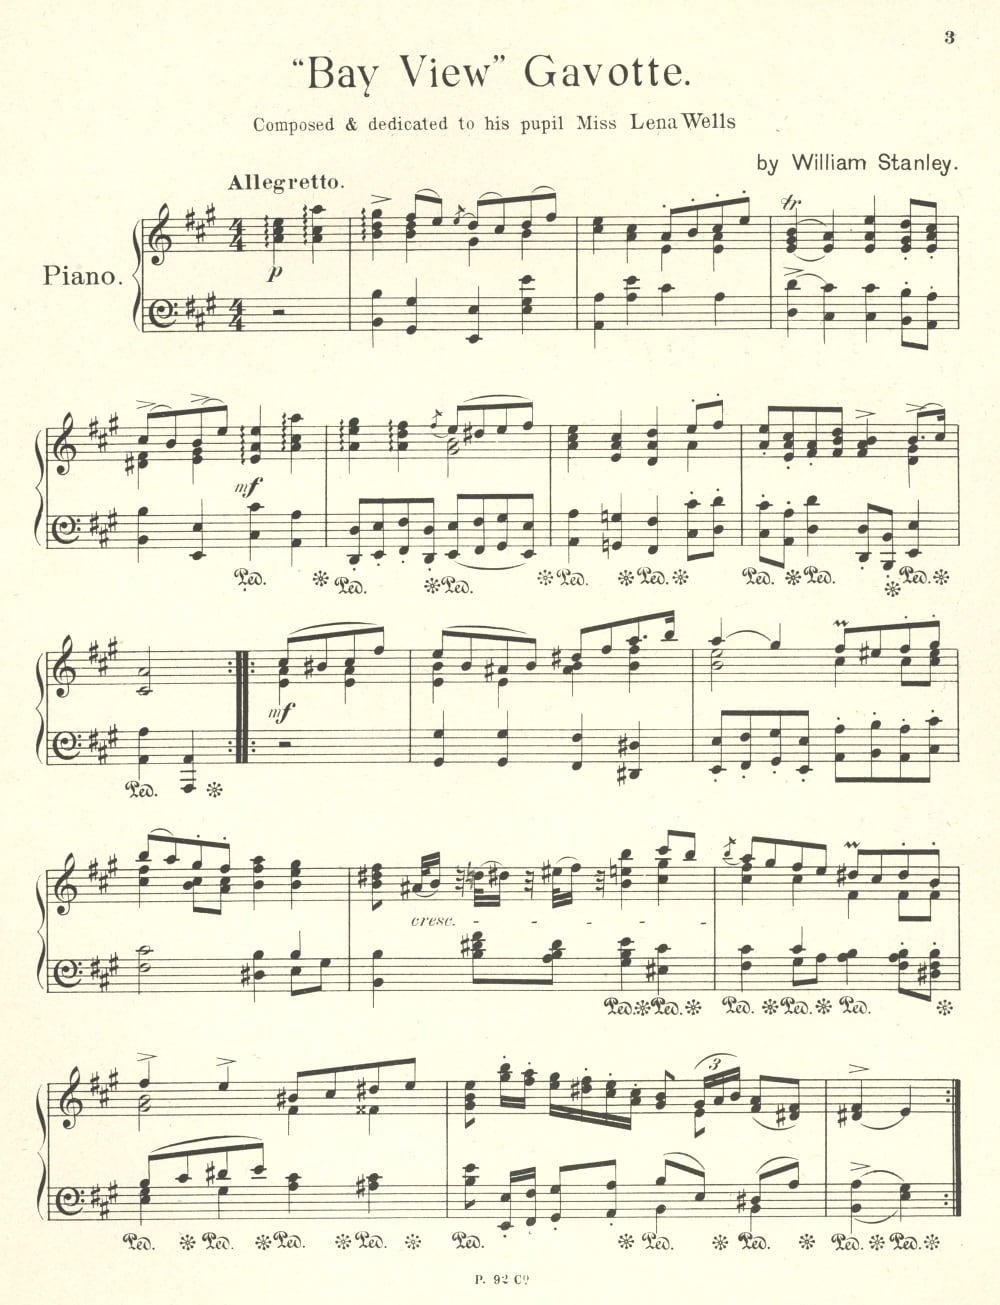 William Stanley, Bay View Gavotte, 1893 (National Library of Australia)